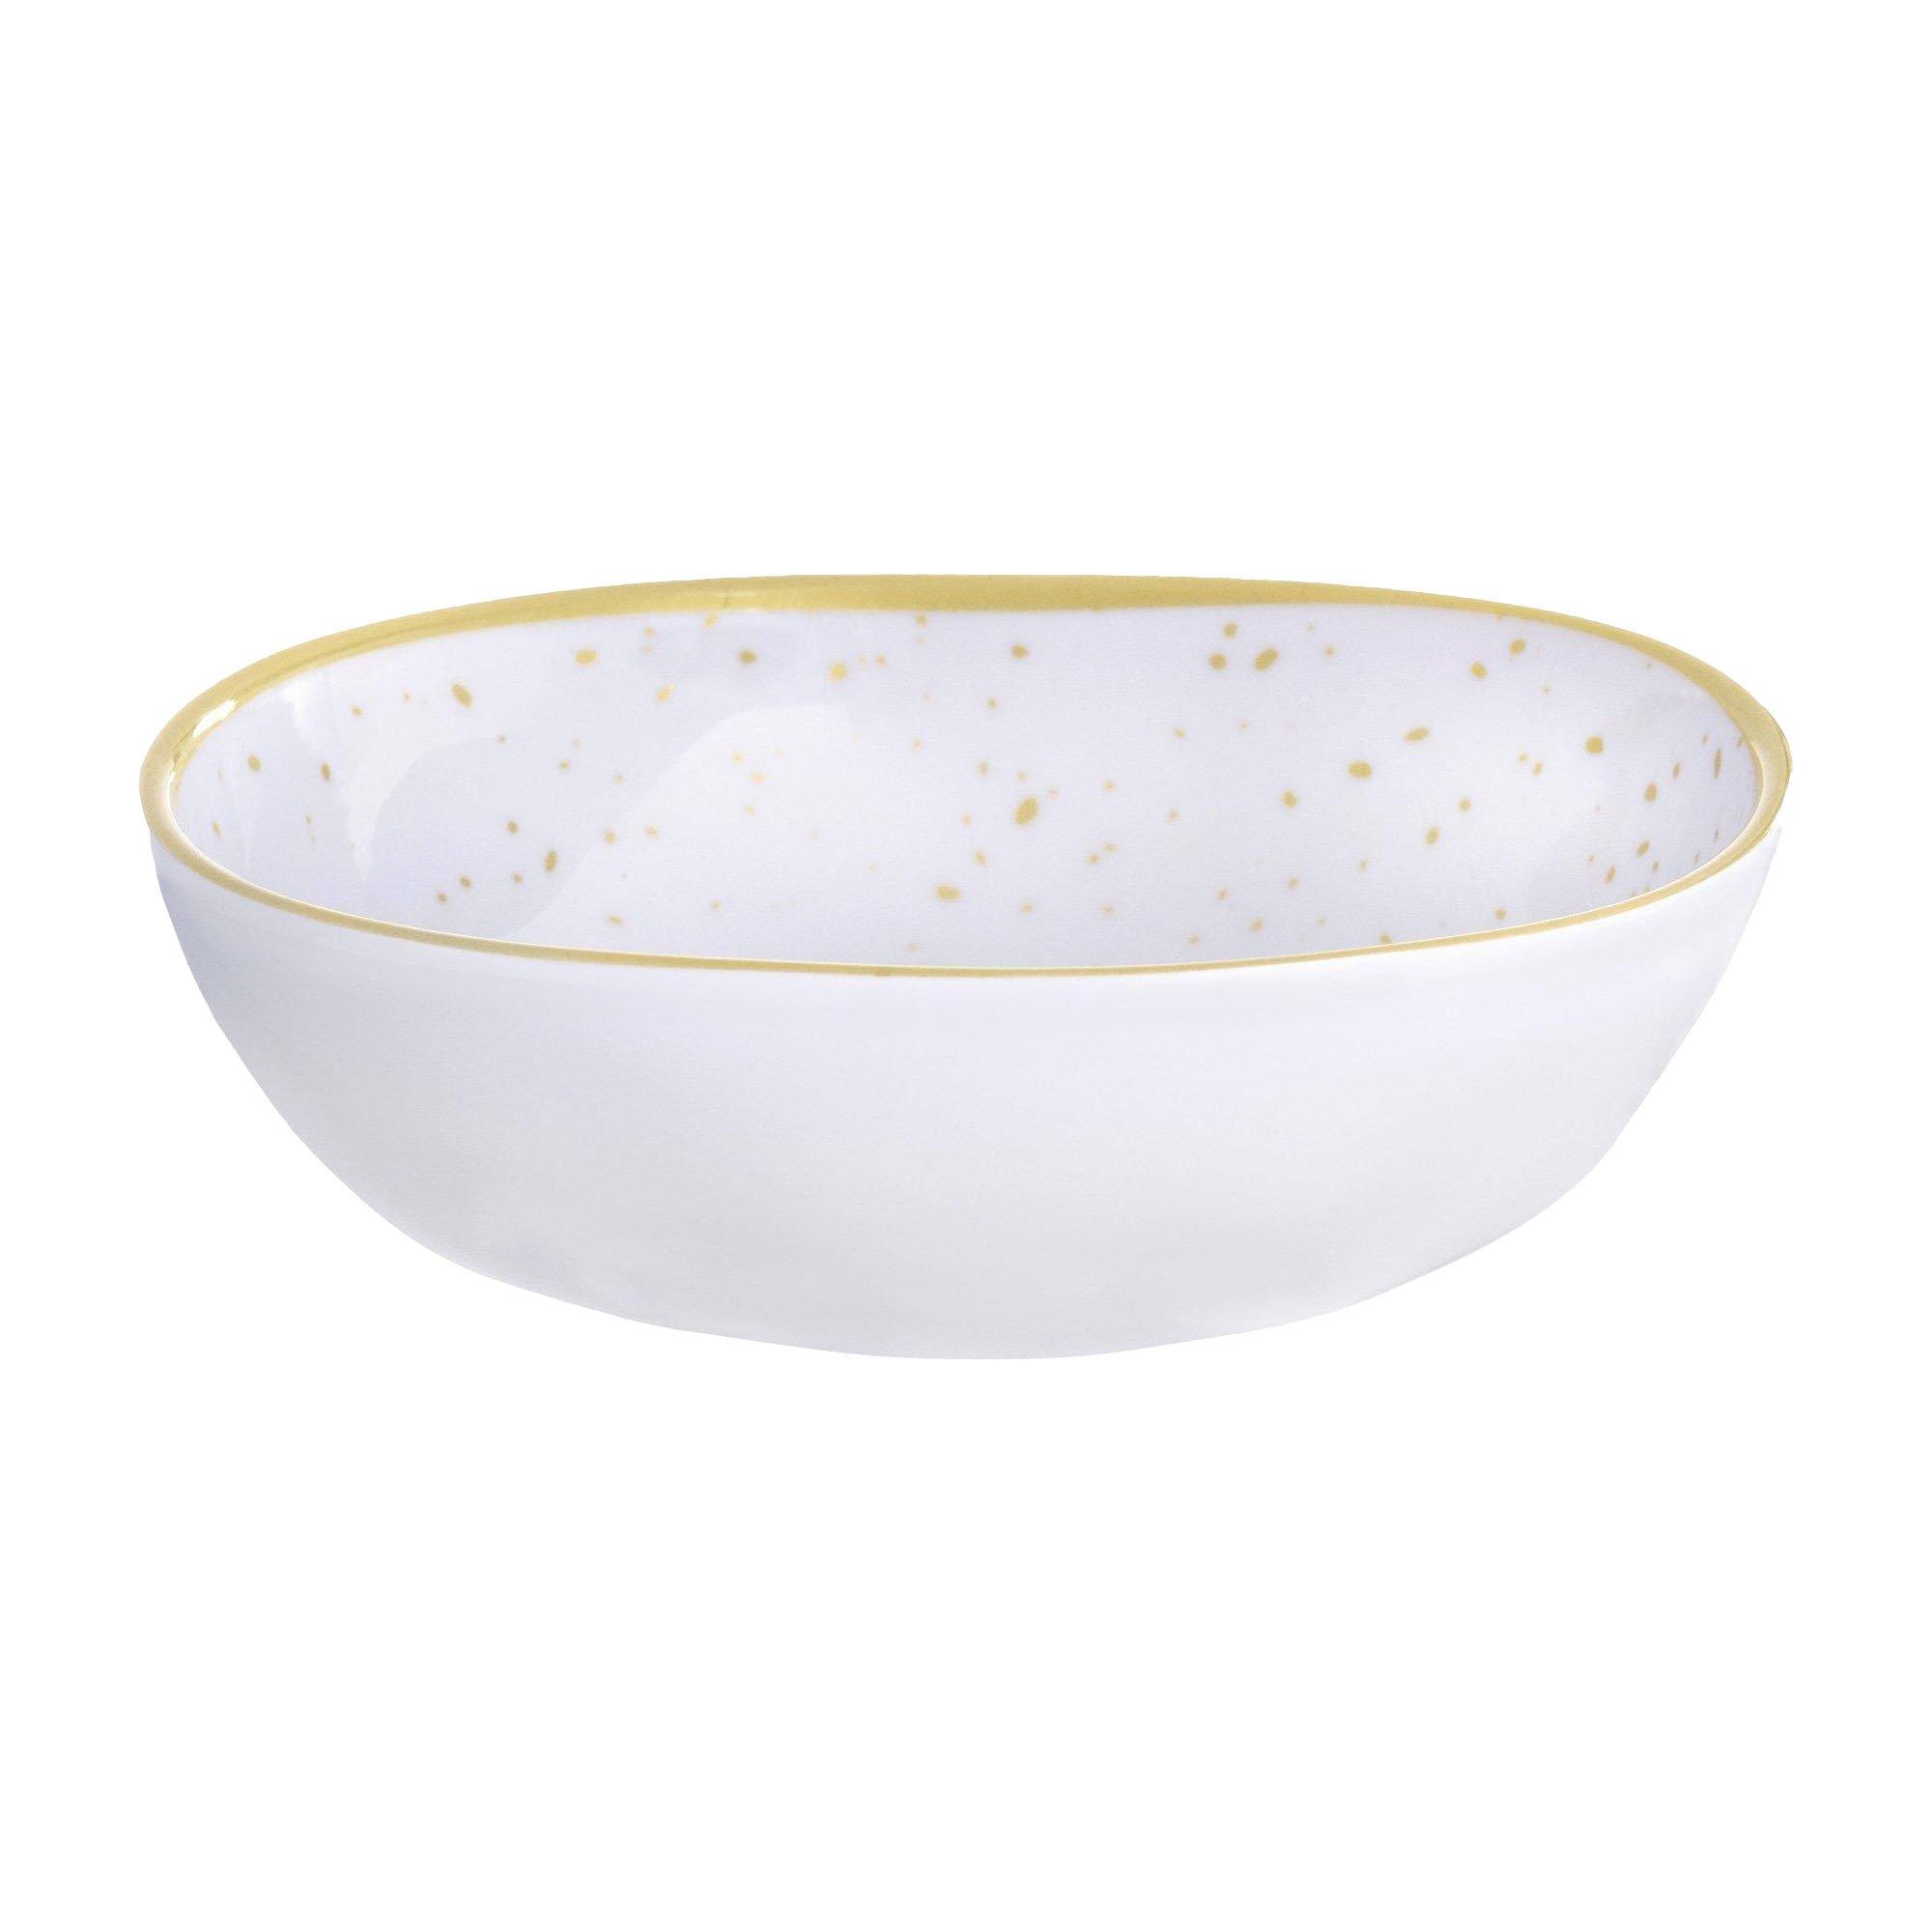 White With Speckles Melamine Bowl, 6.3in, 19.5oz